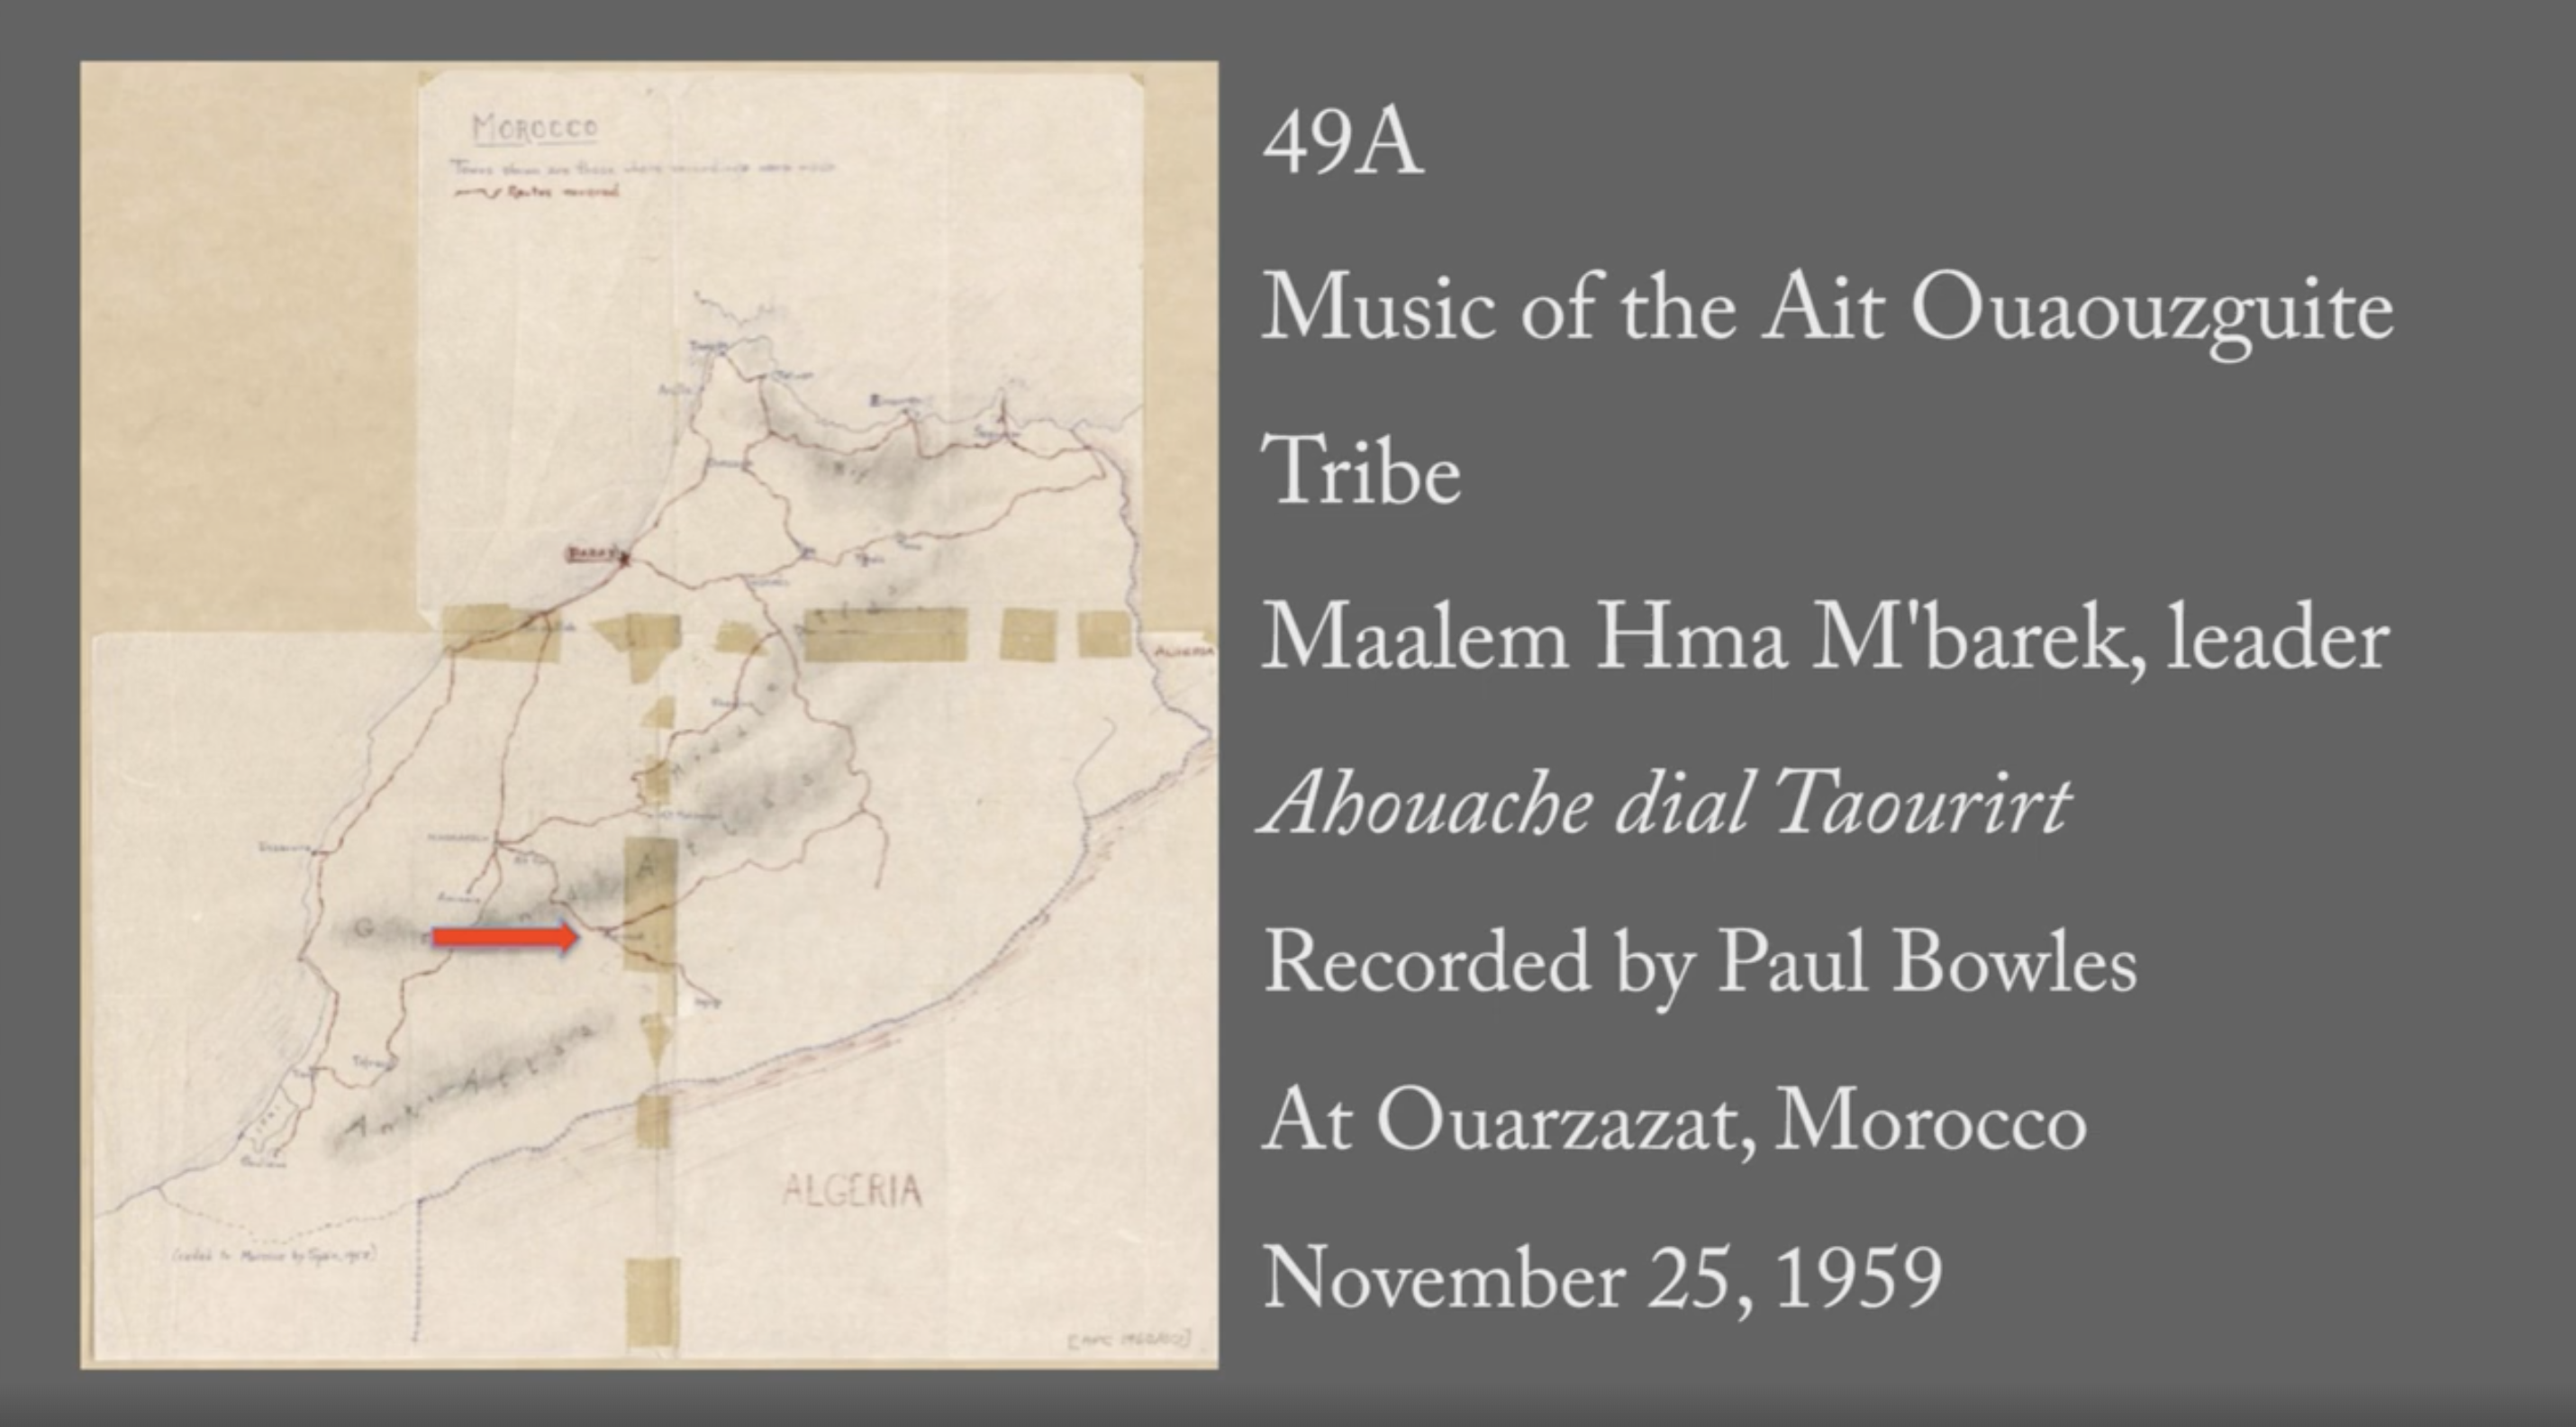 49A: "Ahouache dial Taourirt" (Music of the Ait Ouaouzguite Tribe)